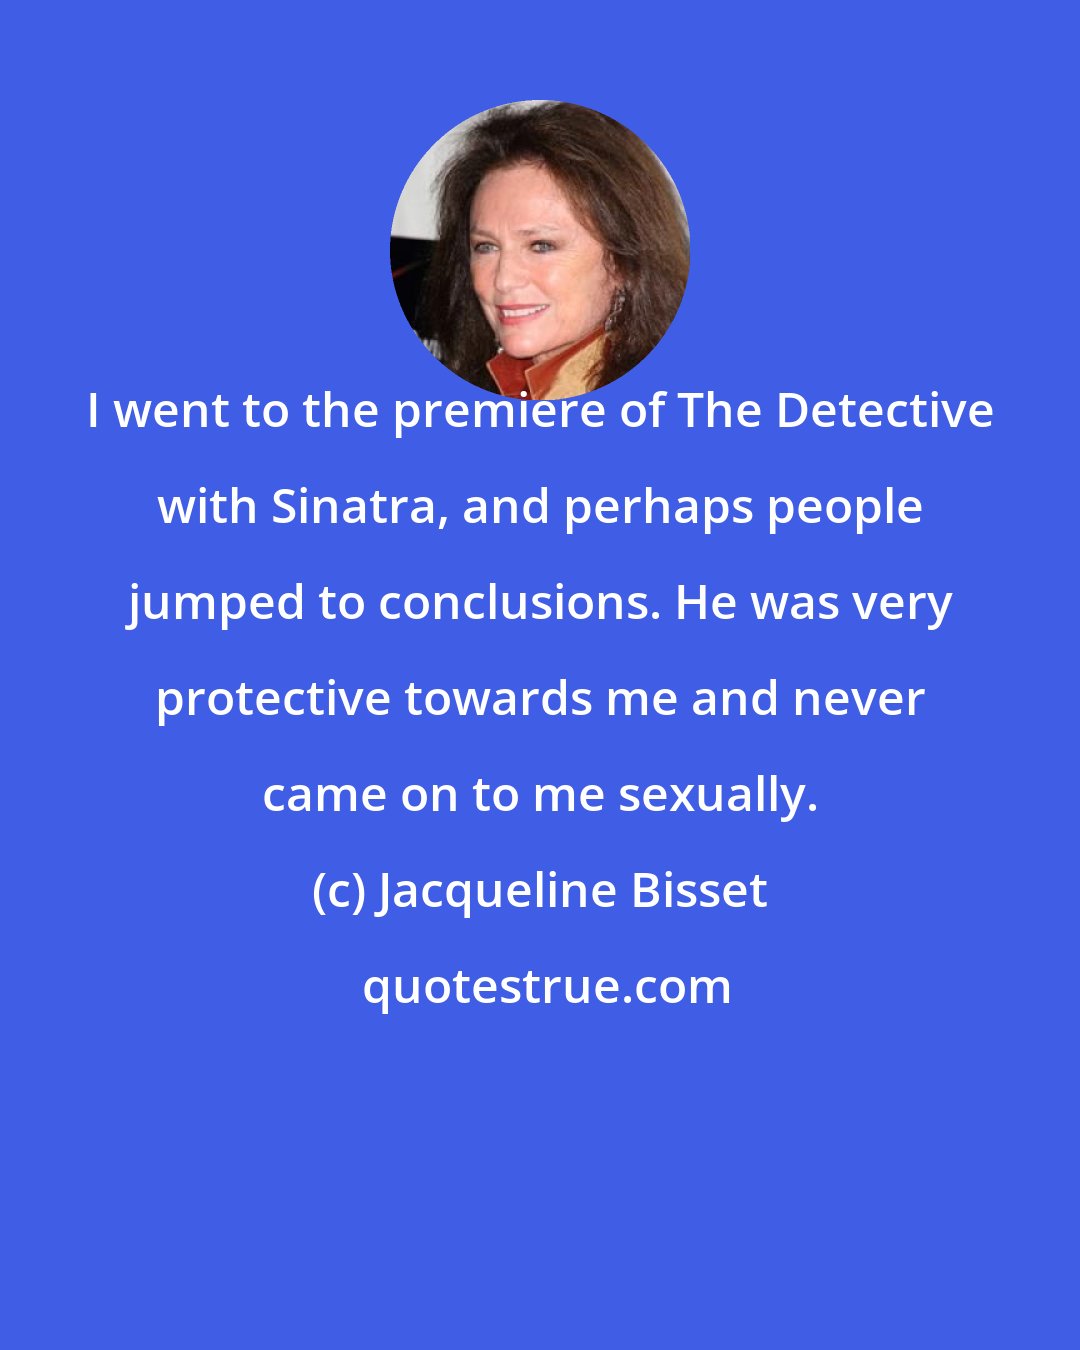 Jacqueline Bisset: I went to the premiere of The Detective with Sinatra, and perhaps people jumped to conclusions. He was very protective towards me and never came on to me sexually.